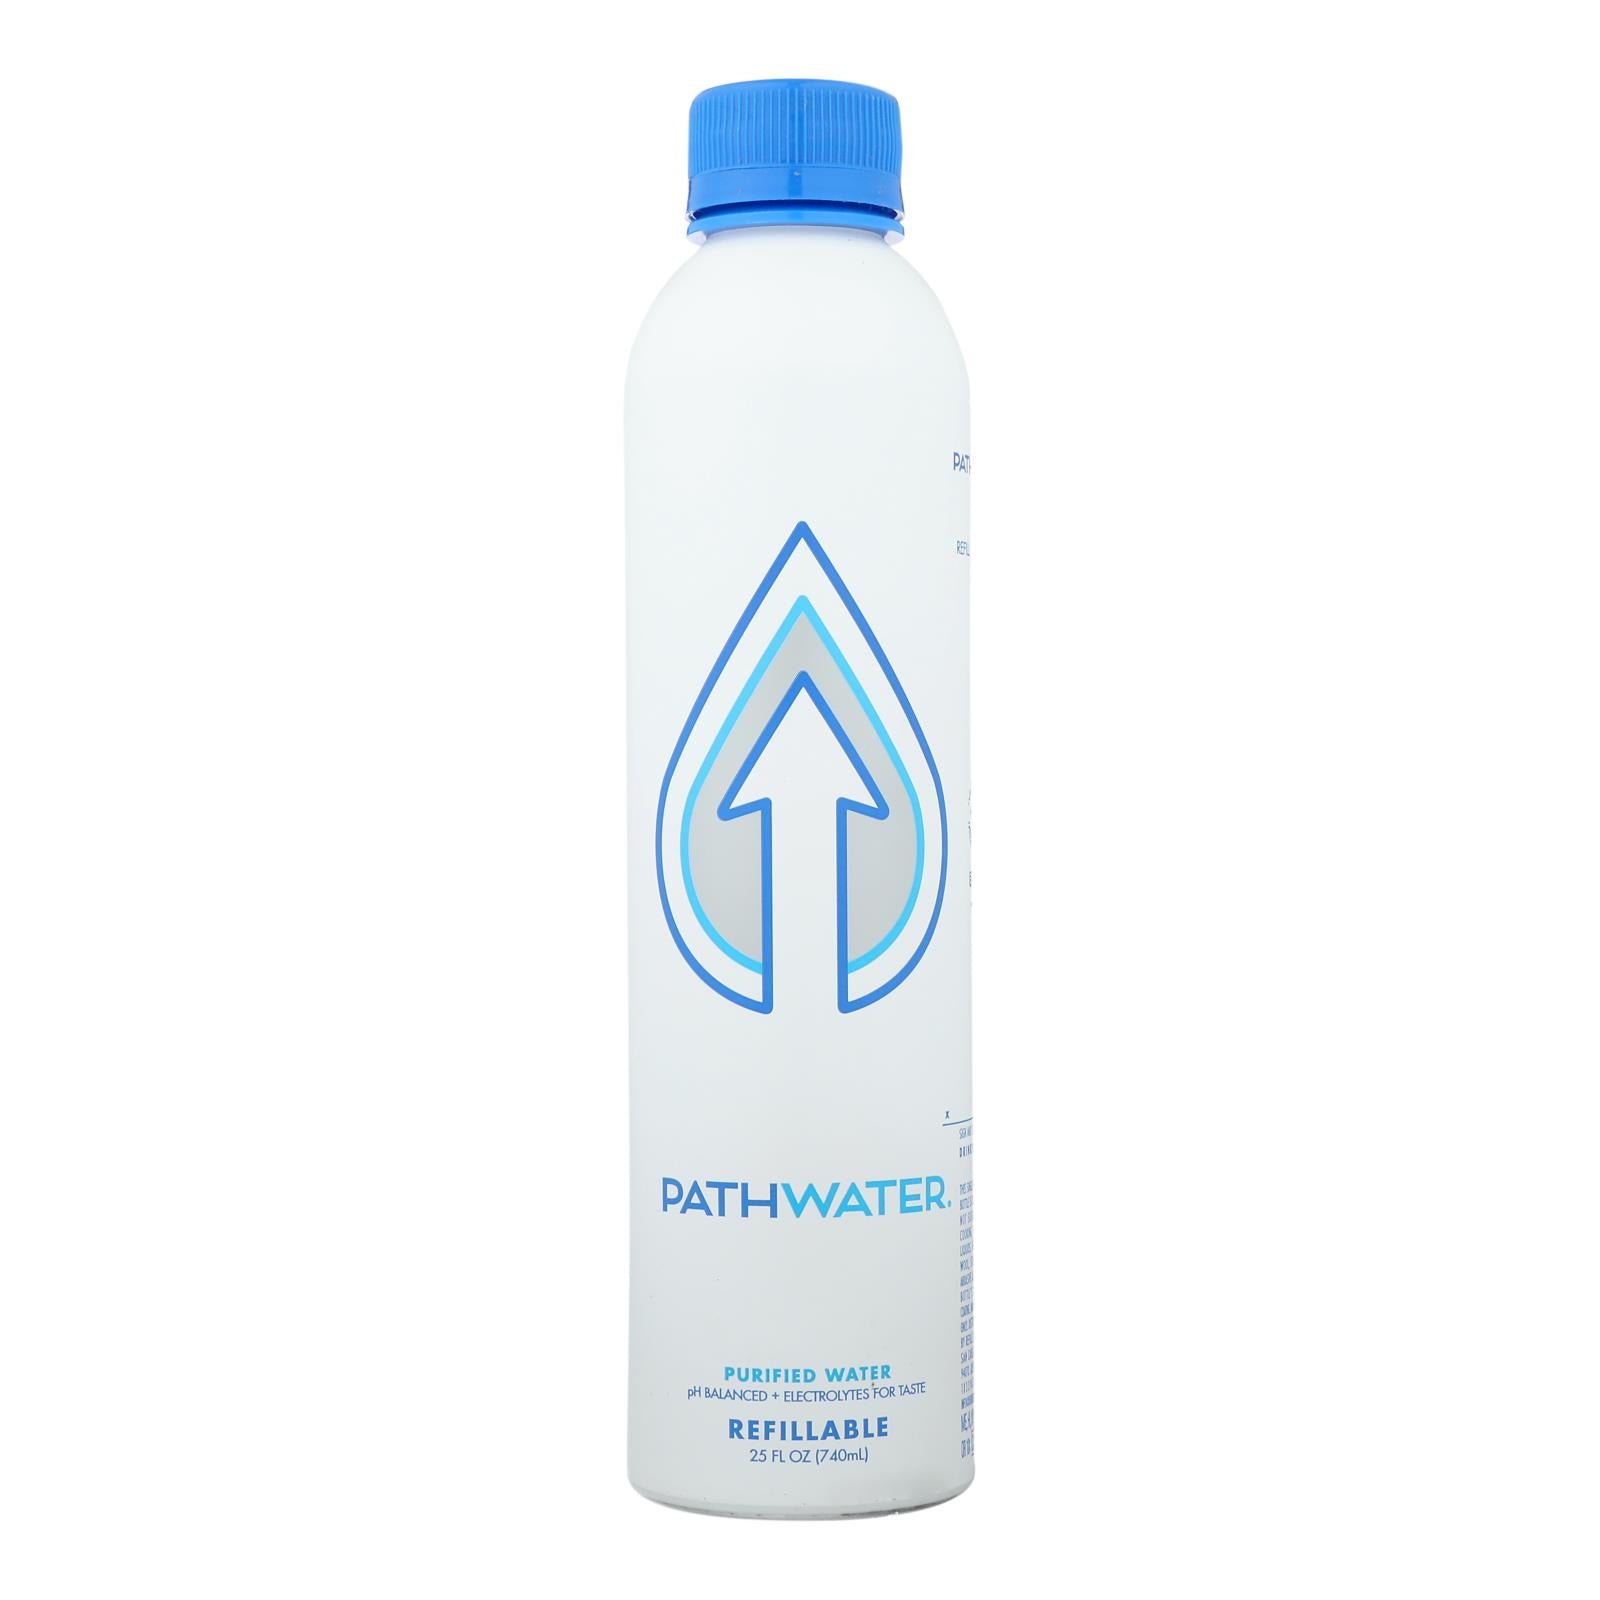 Pathwater - Water Purified - Case Of 12 - 25 Fz